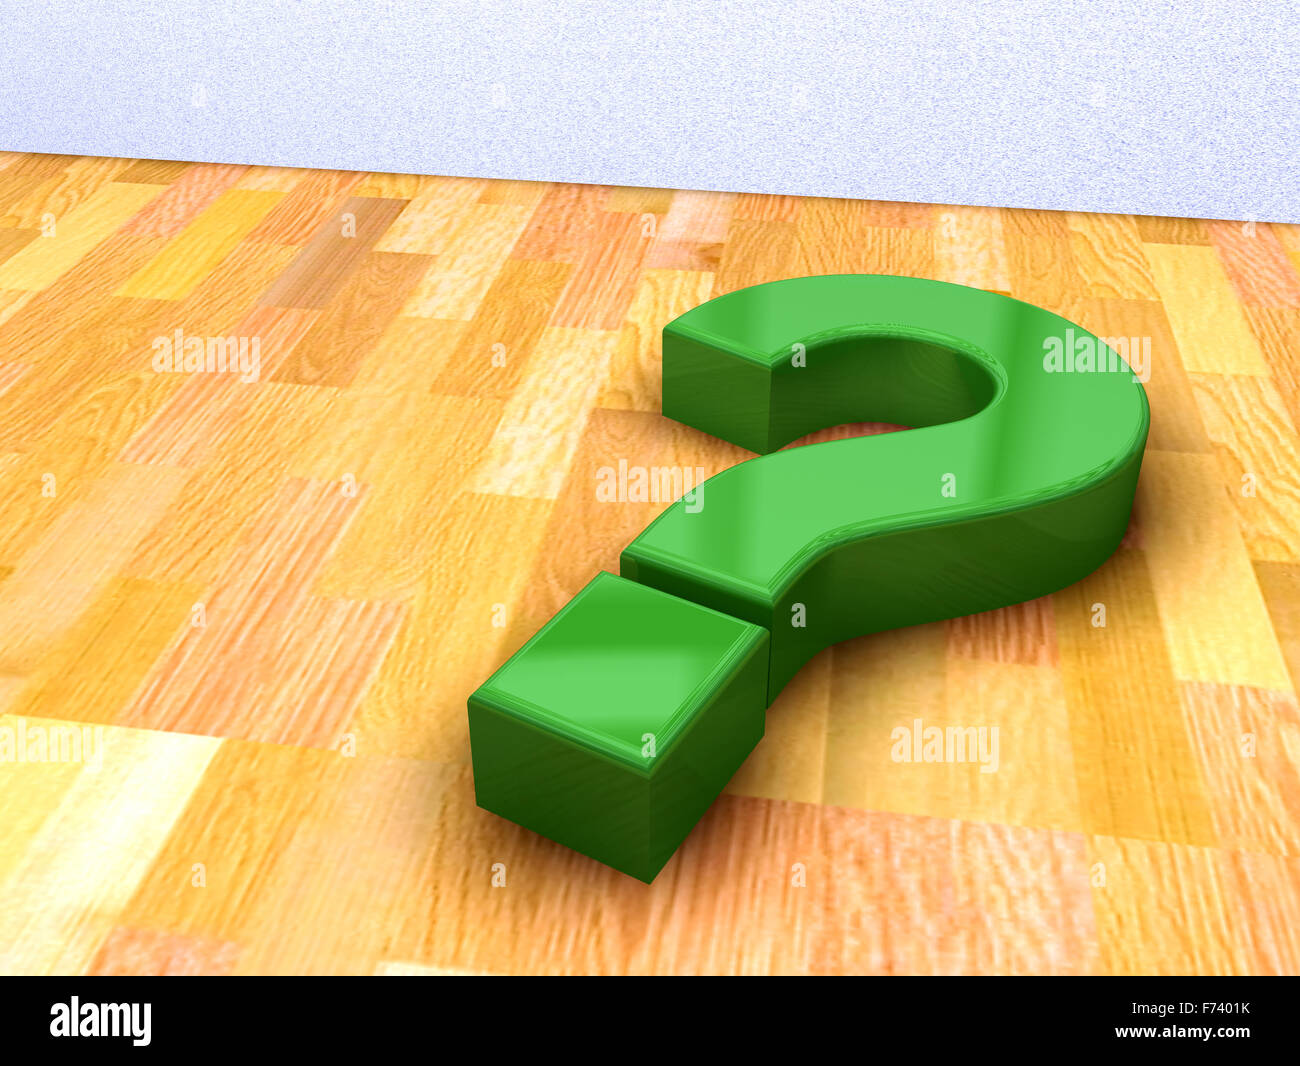 3d image of green question mark on a wood floor Stock Photo